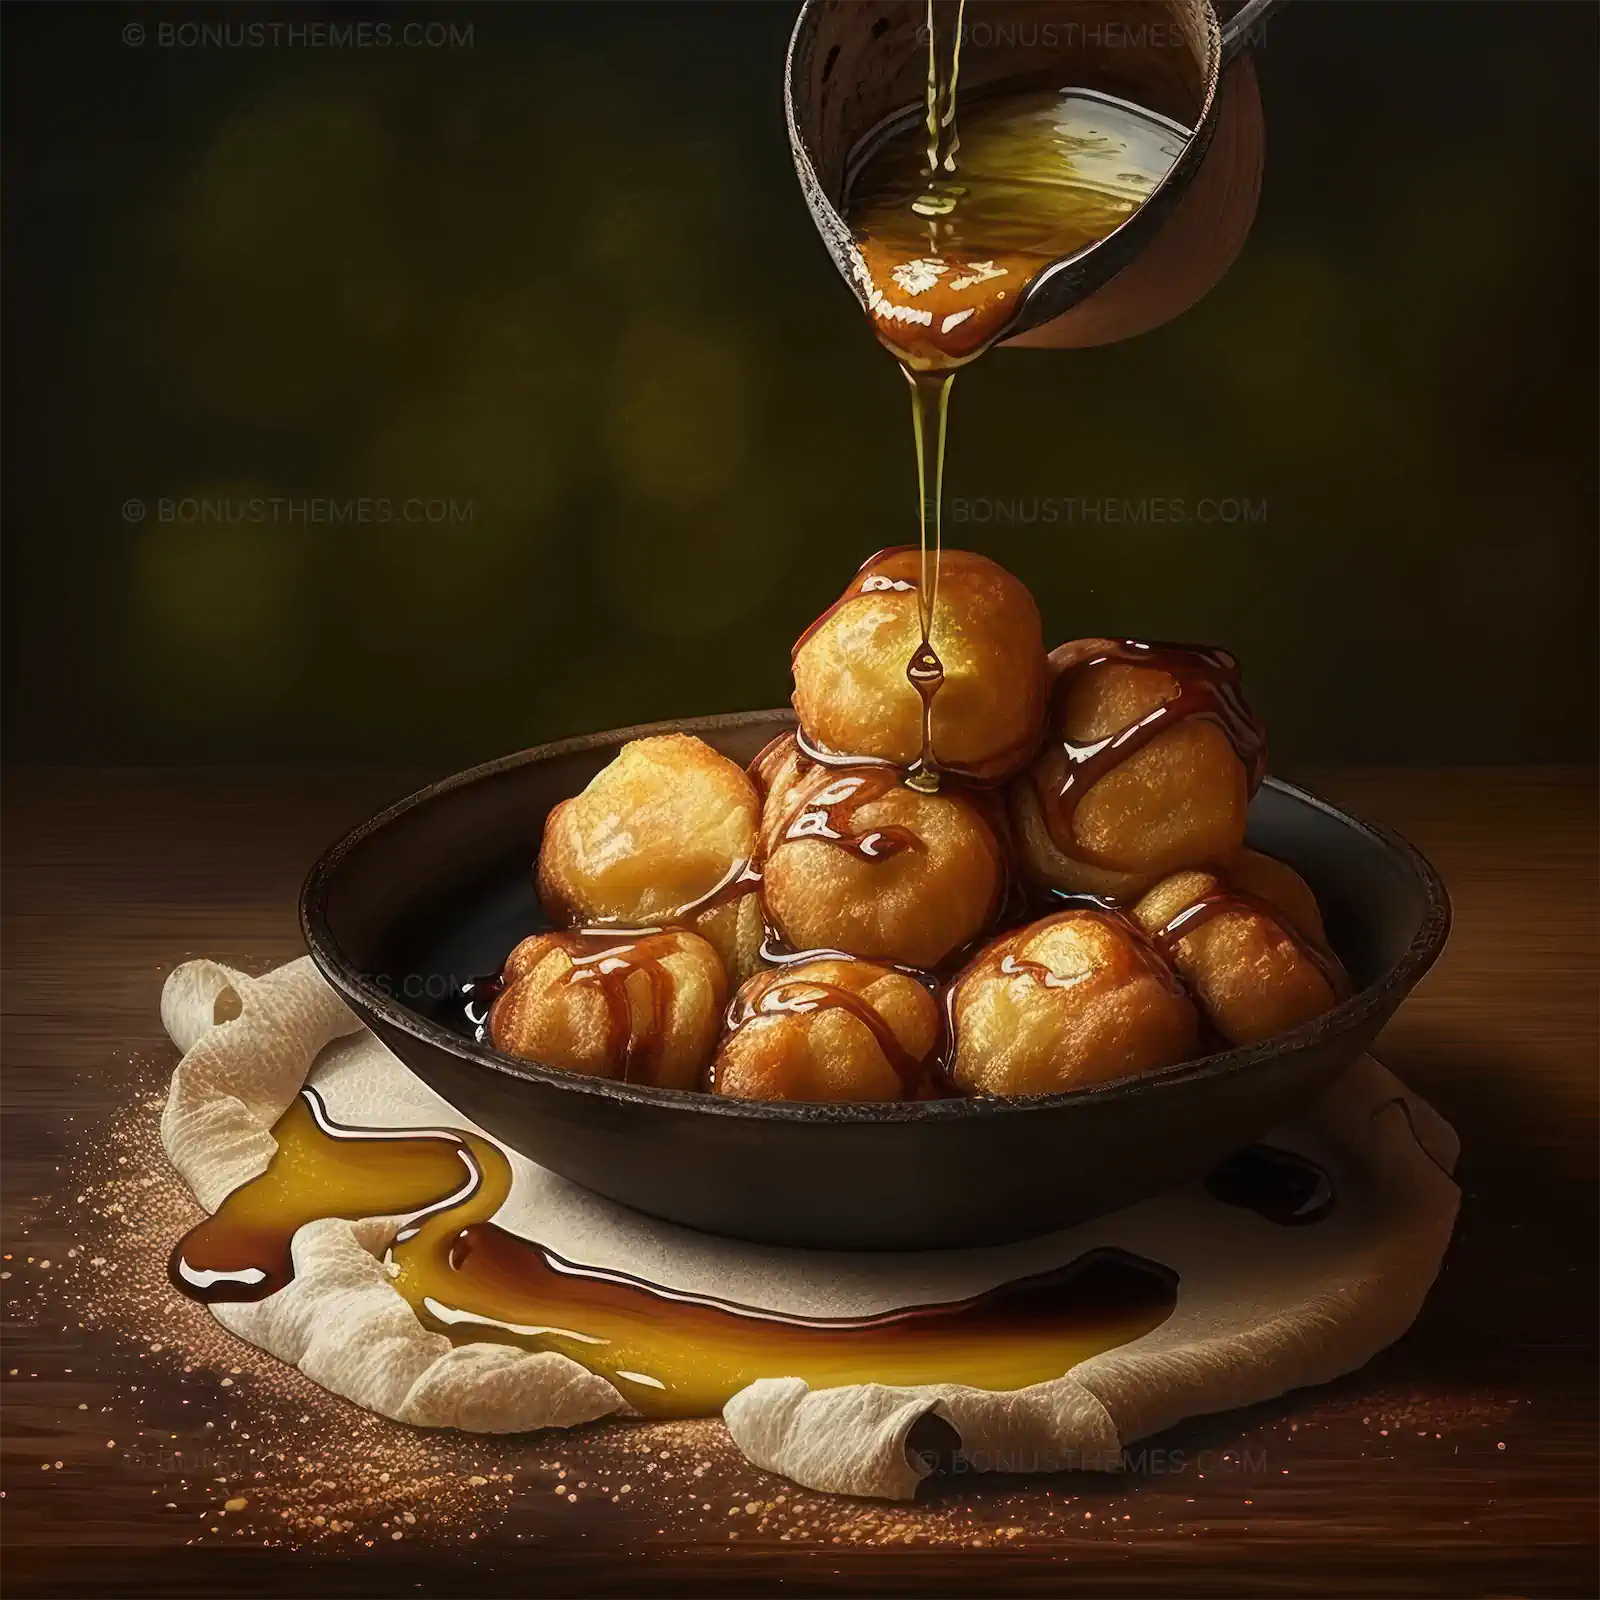 Fried dough balls drizzled with honey syrup and cinnamon